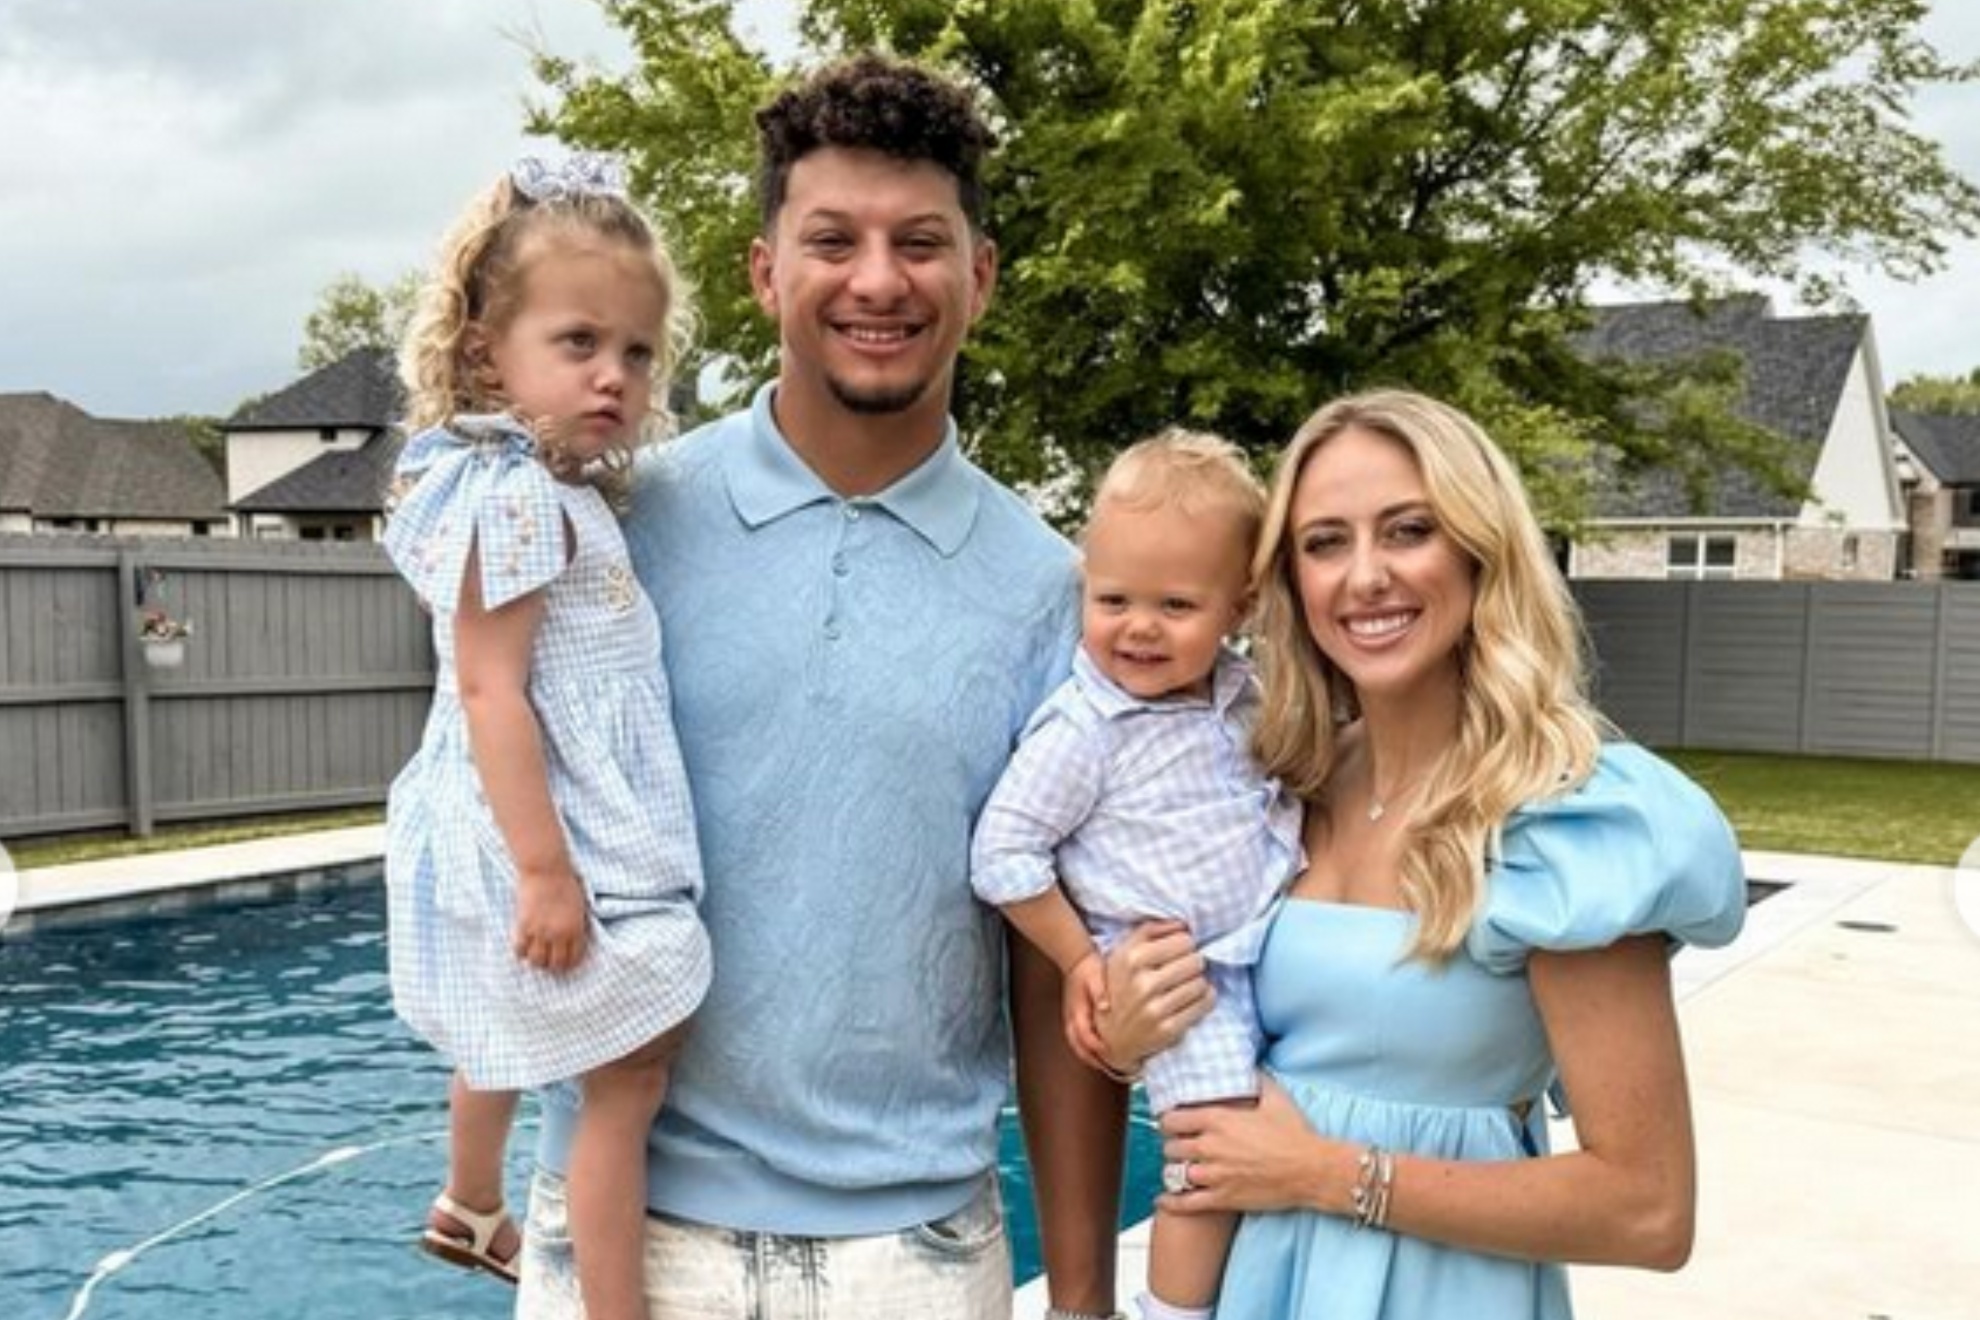 Brittany Mahomes shares sweet video of her son Bronze. What was the boy's gesture that will melt your heart? Brittany doesn't miss an opportunity to share significant moments from her family life.